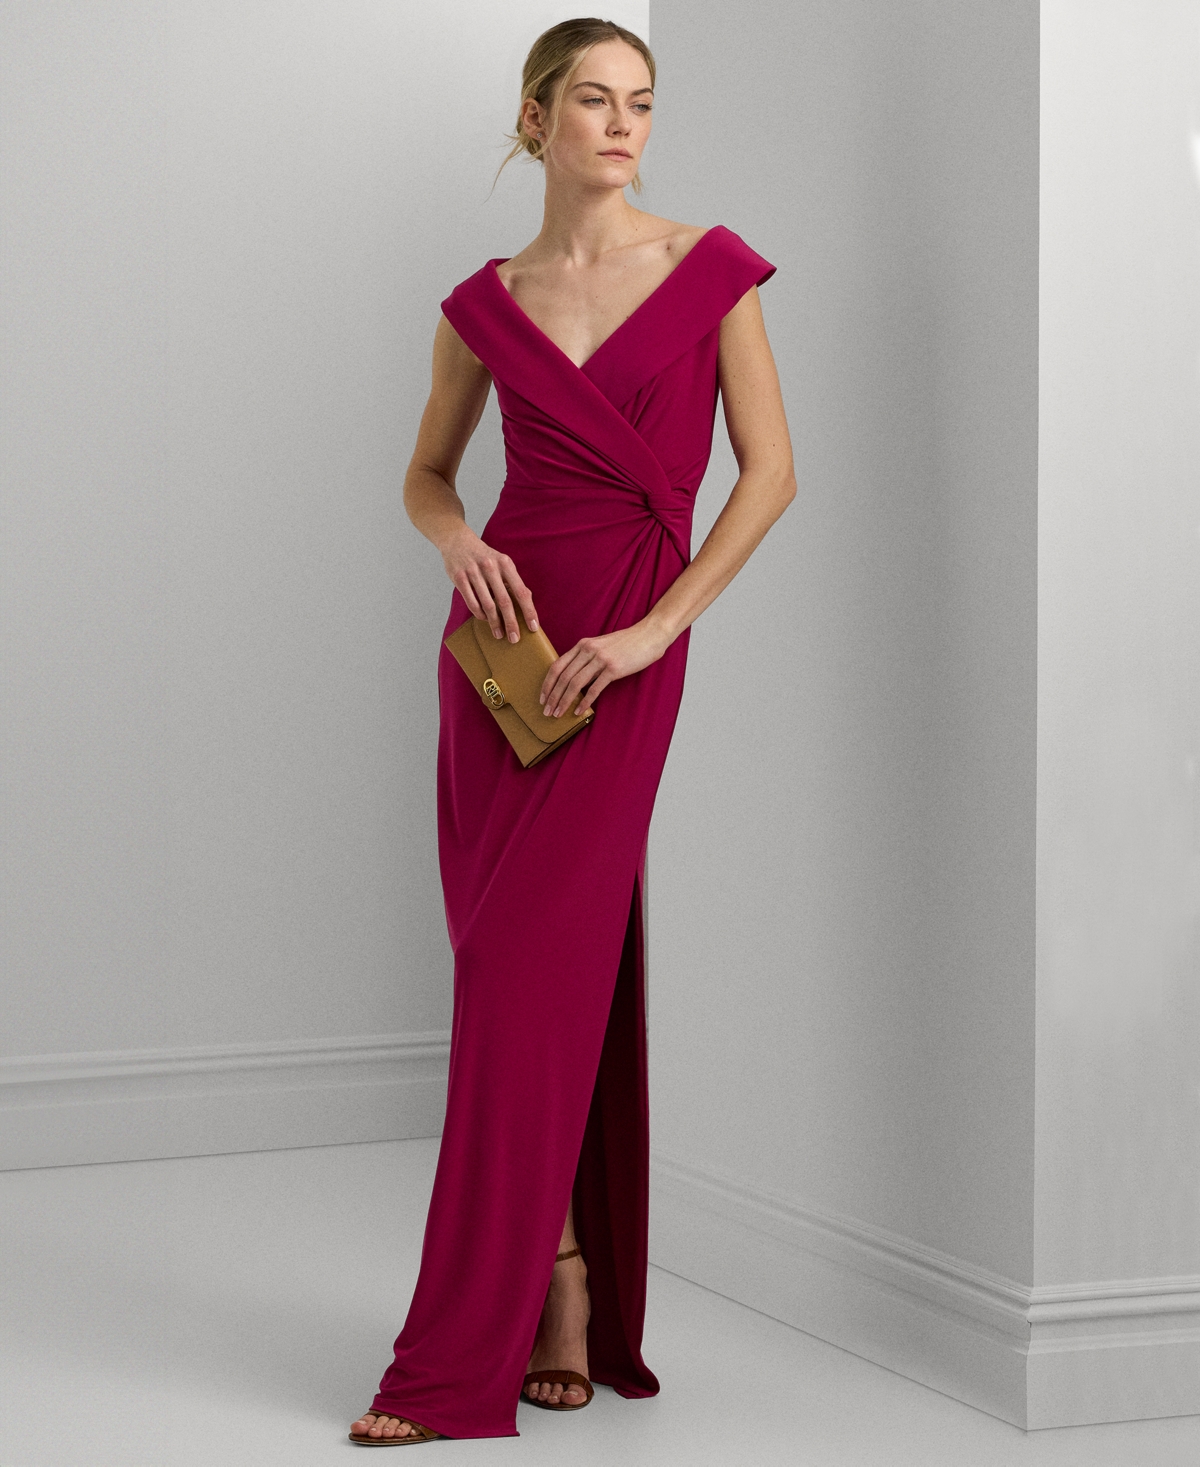 Women's Twisted Off-The-Shoulder Gown - Fuchsia Berry